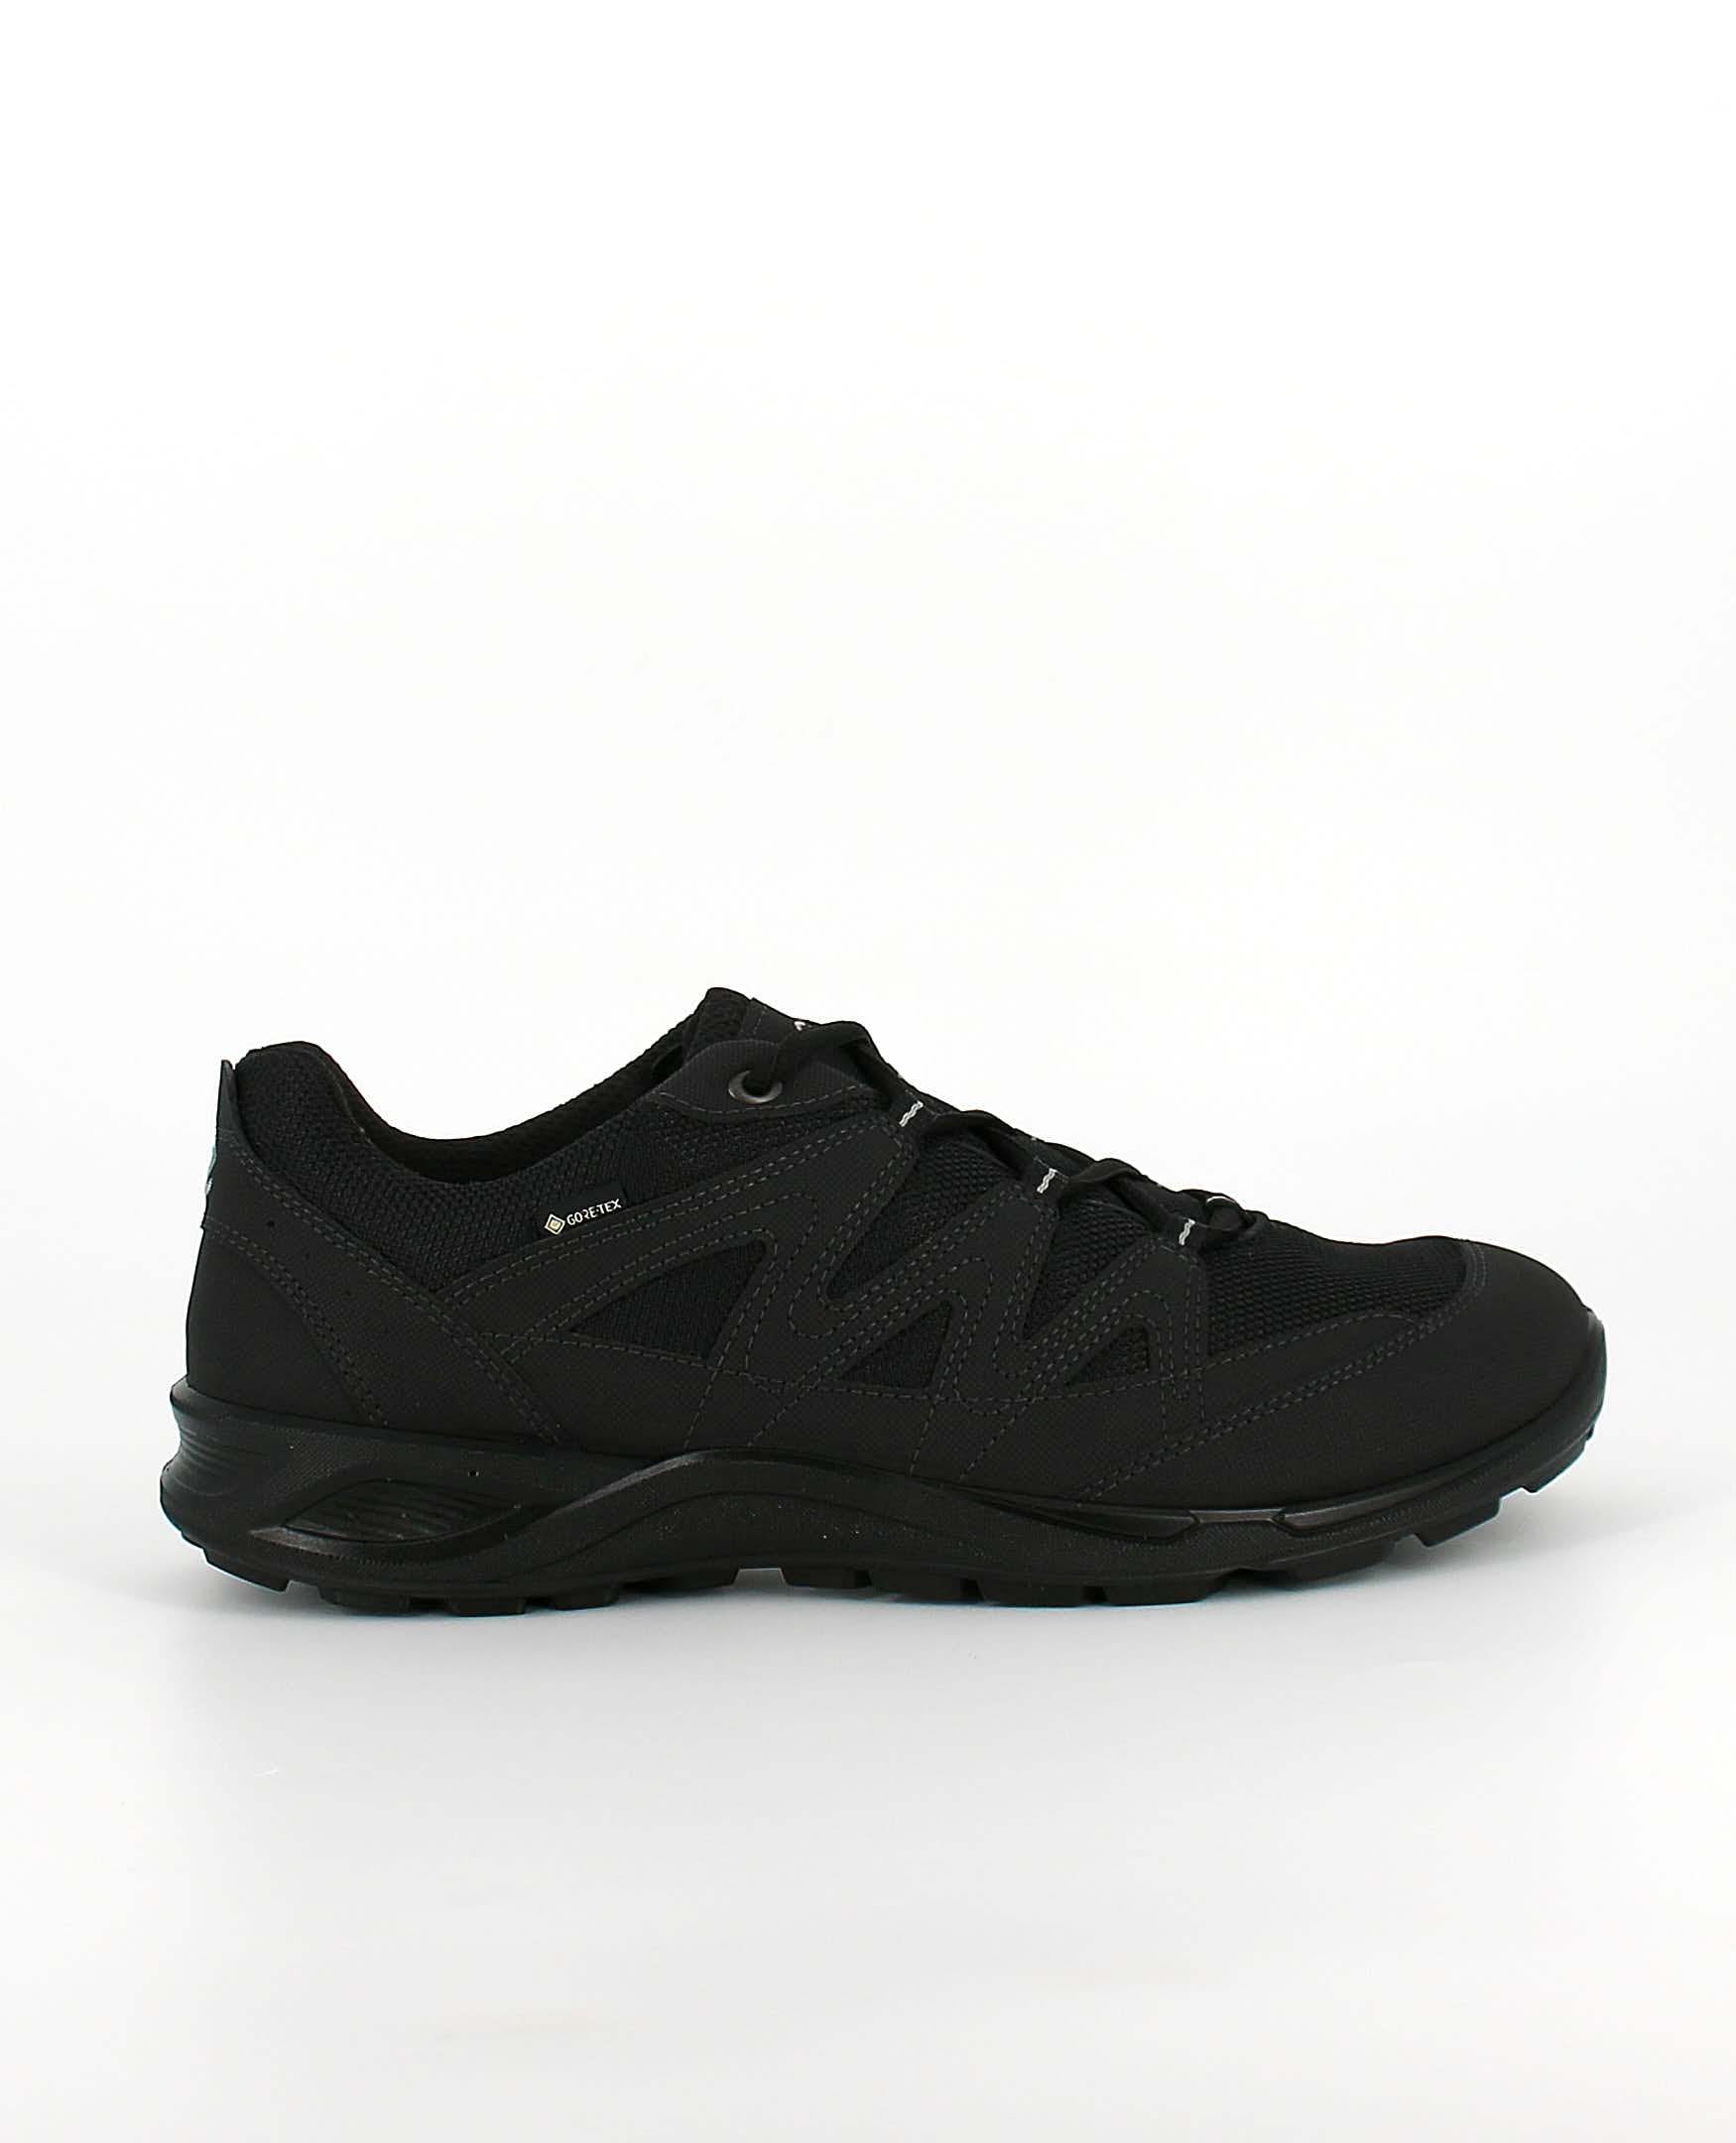 The side of the Ecco Terracruise LT M, in Black.